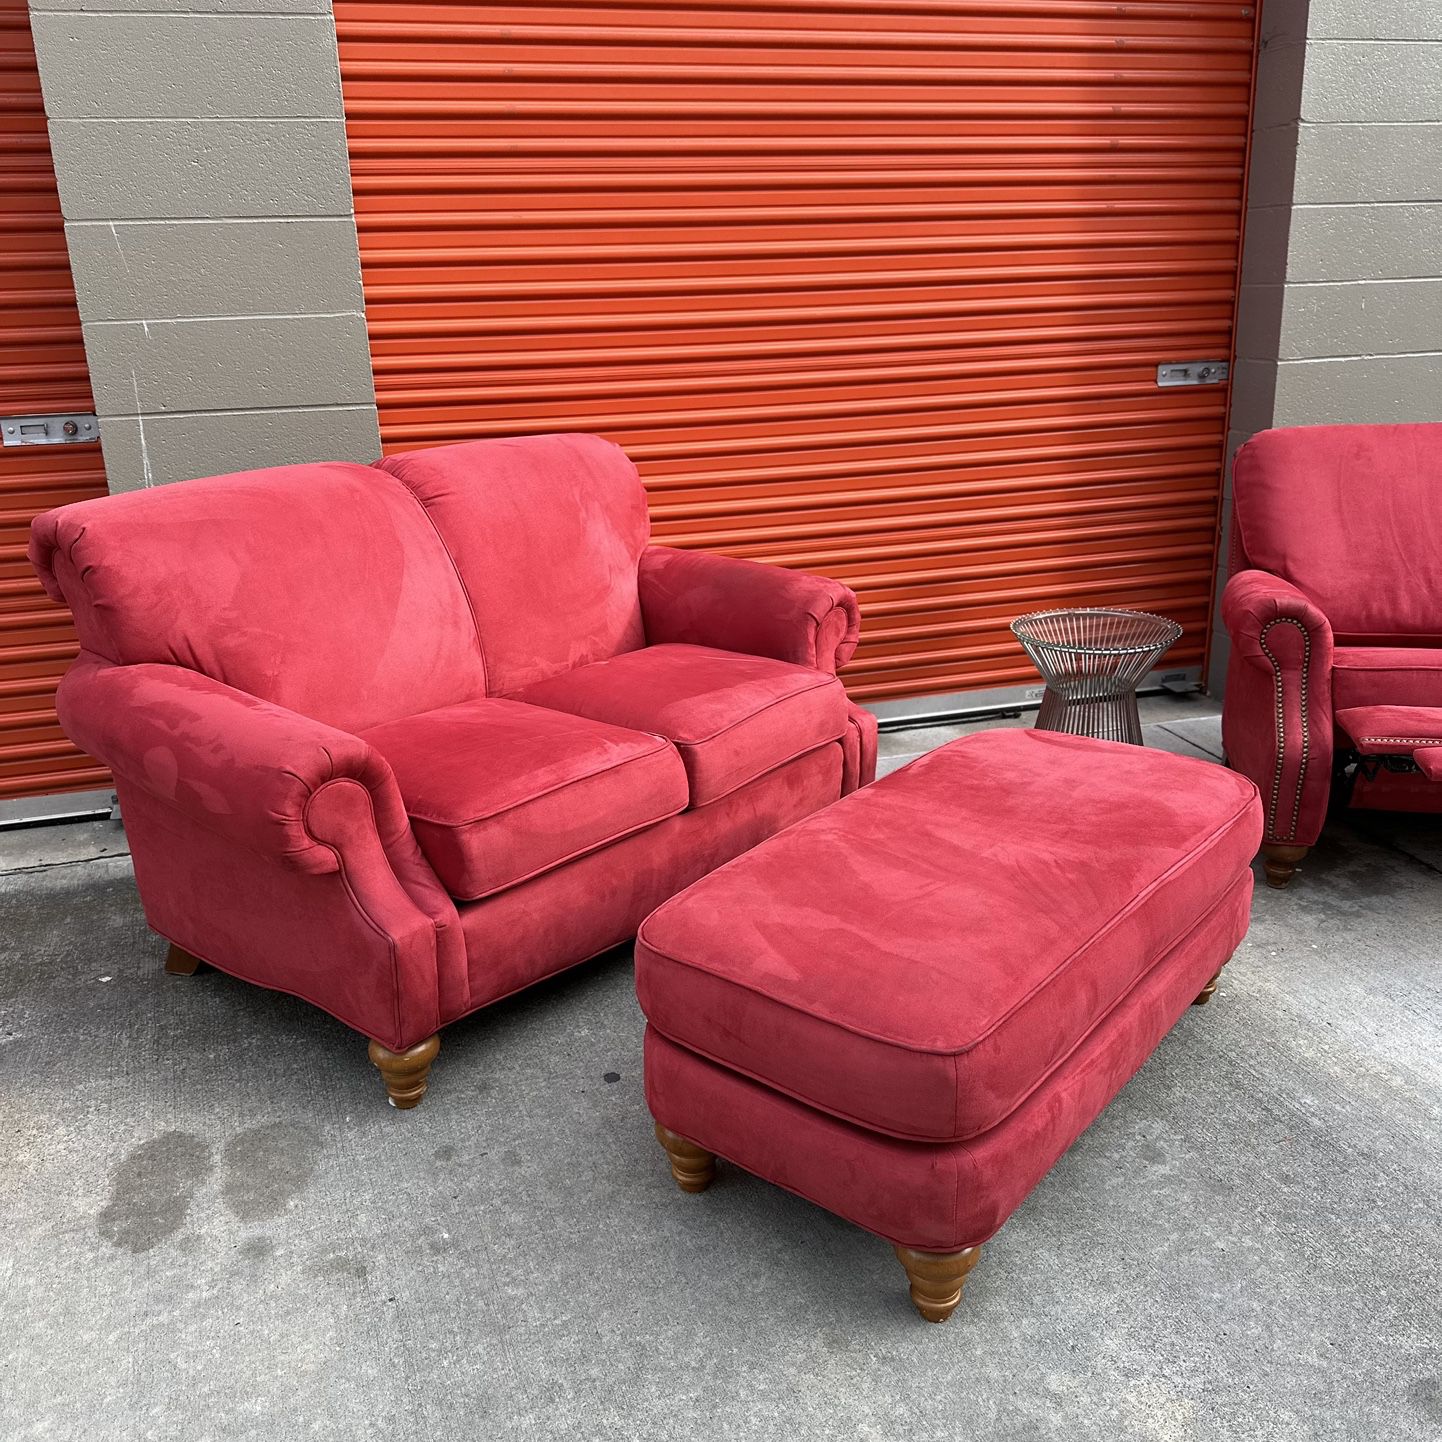 Red velvet couch & chair set